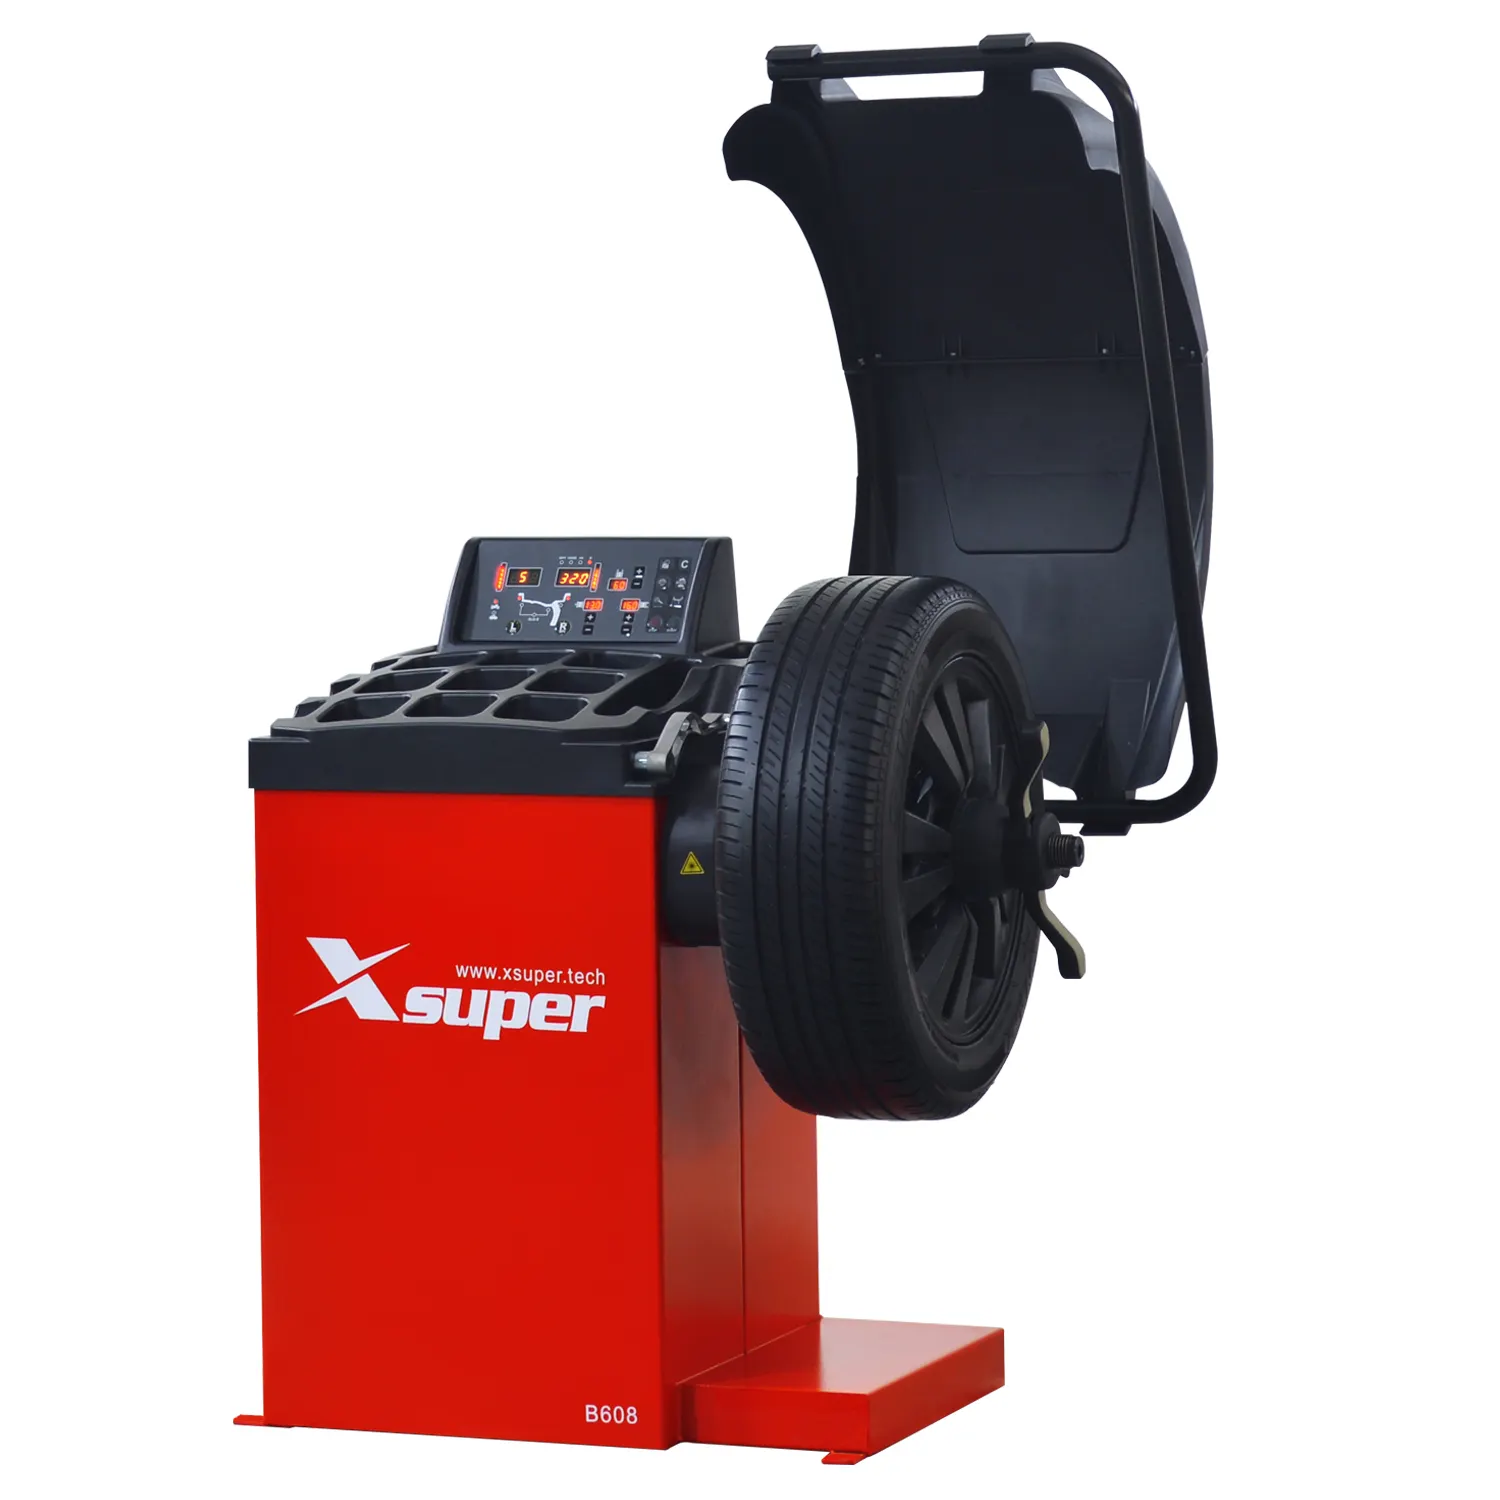 TOP Lawrence tyre laser wheel balancer 3D wheel alignment car maintenance tools,tyre changer and other vehicle equipment machine